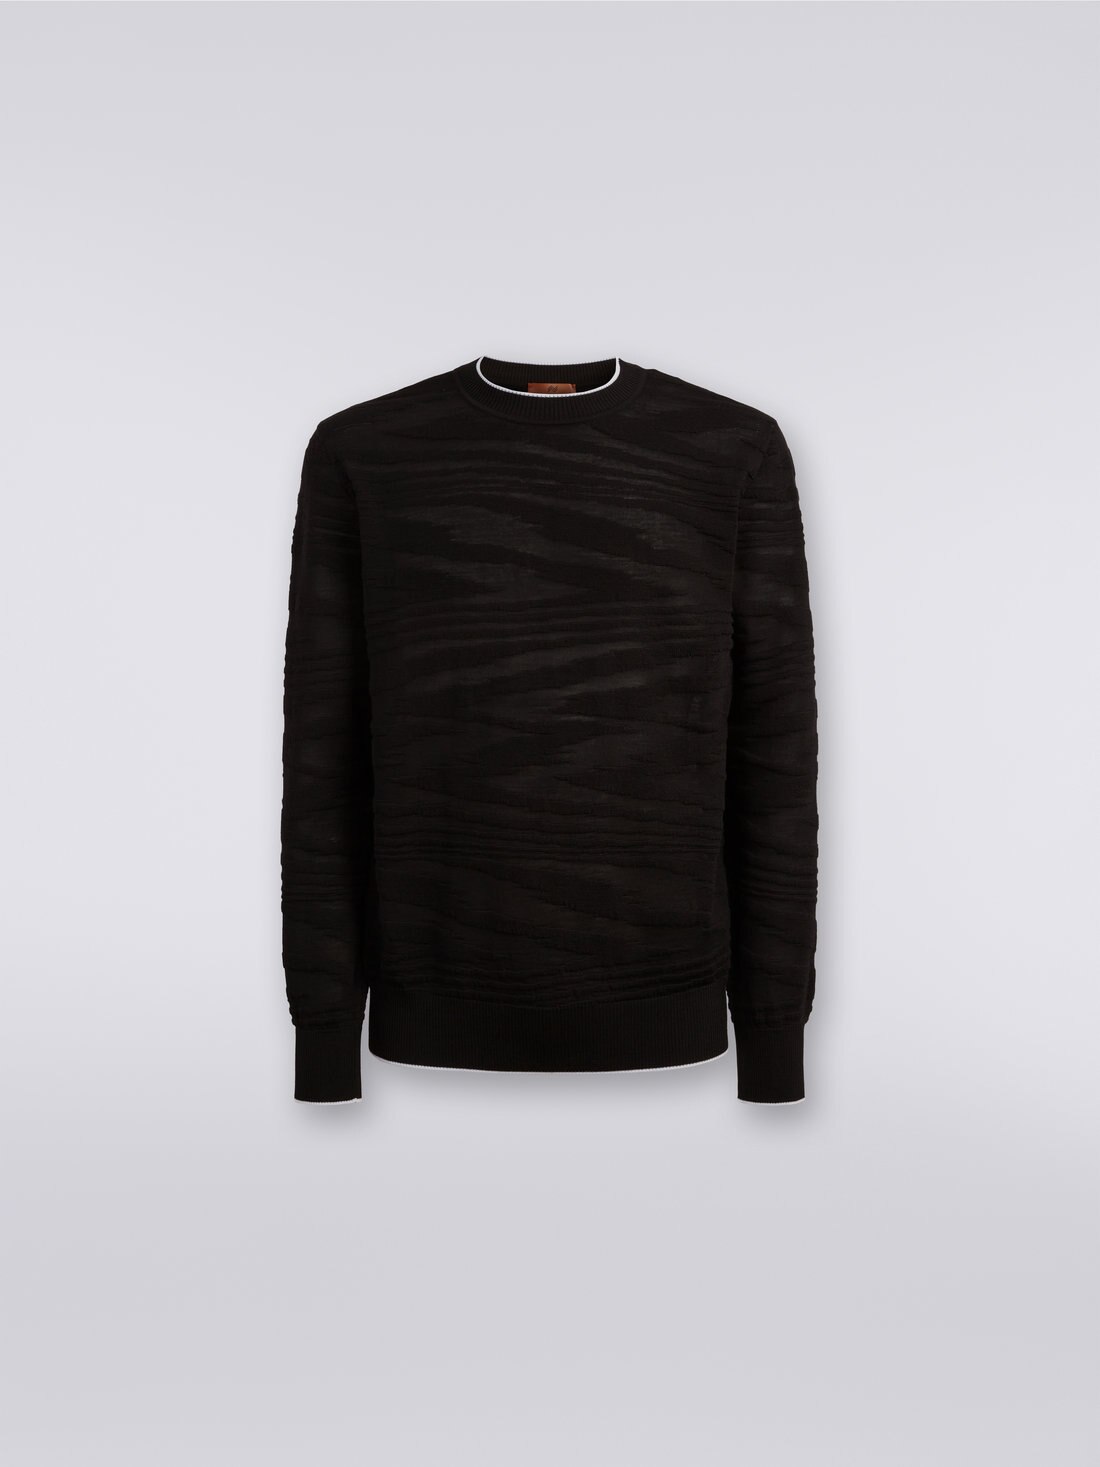 Embossed wool and viscose crew-neck pullover, Black    - 0